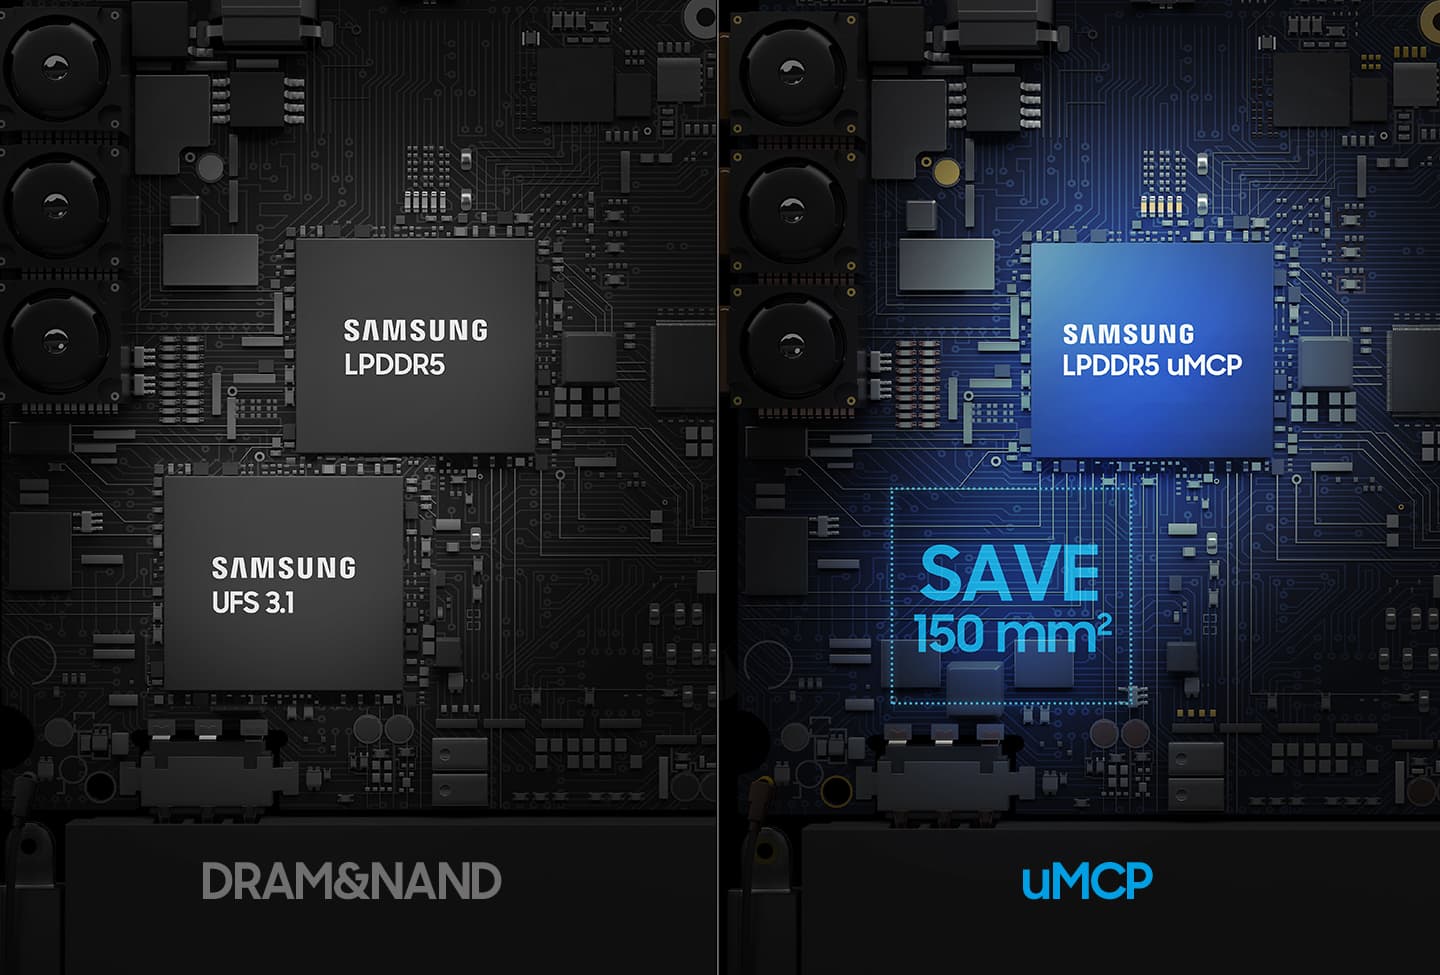 An image is the LPDDR5 and UFS 3.1 products are on the left, and the SAMSUNG LPDDR5 uMCP product is on the right, and it is an image comparing the size of the arranged space.